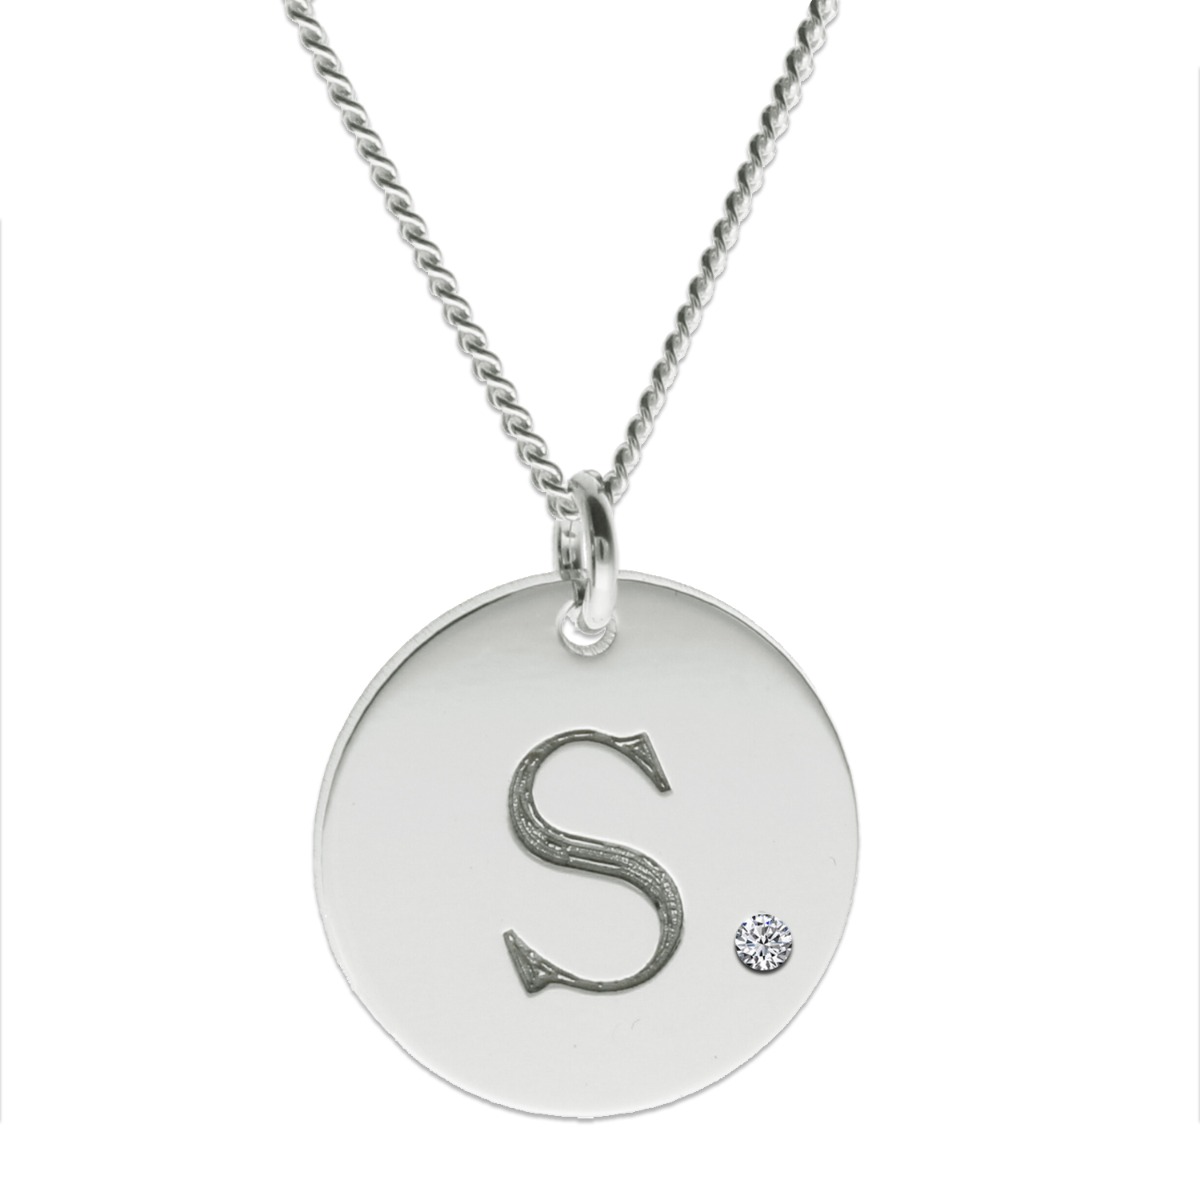 9ct White Gold Engraved Initial Disc With Crystal Or Real Diamond